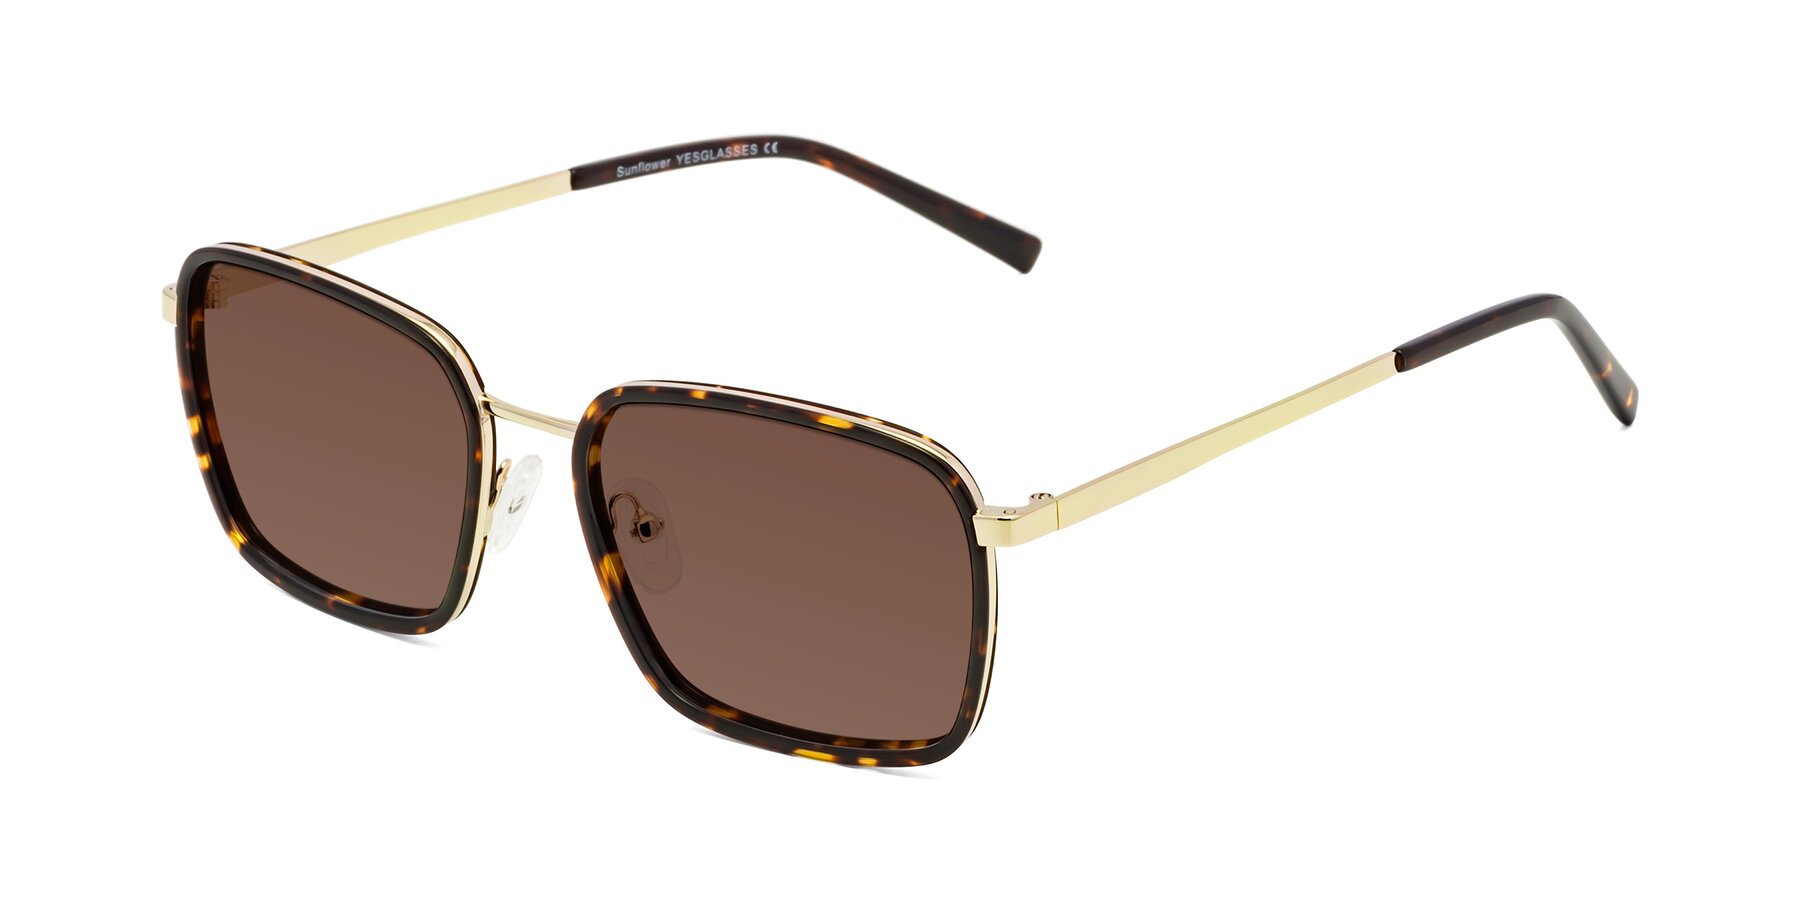 Angle of Sunflower in Tortoise-Gold with Brown Tinted Lenses